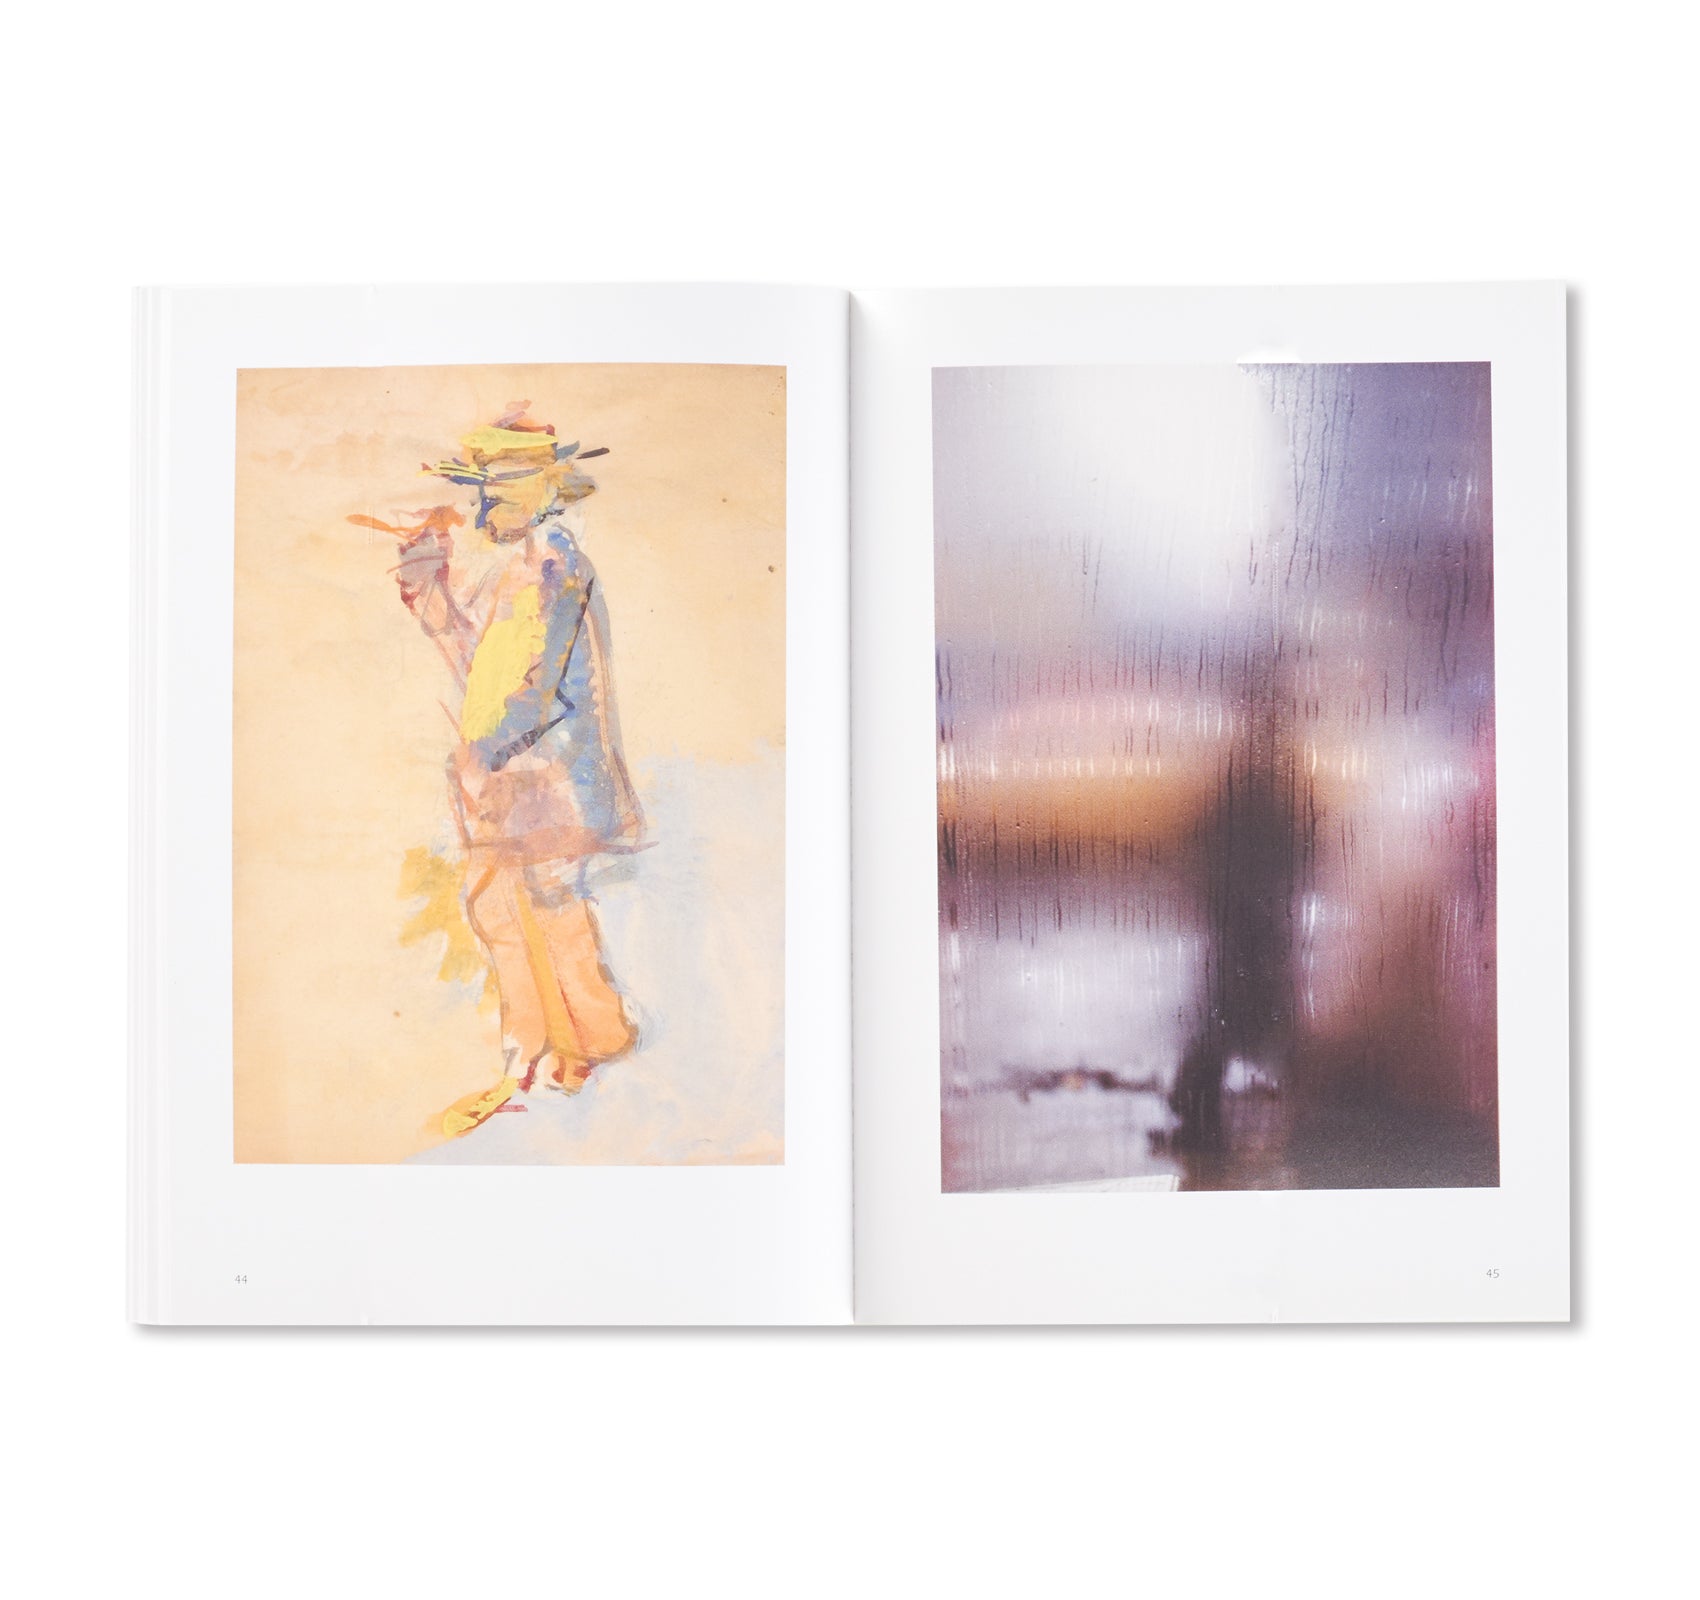 PHOTOGRAPHS AND WORKS ON PAPER by Saul Leiter